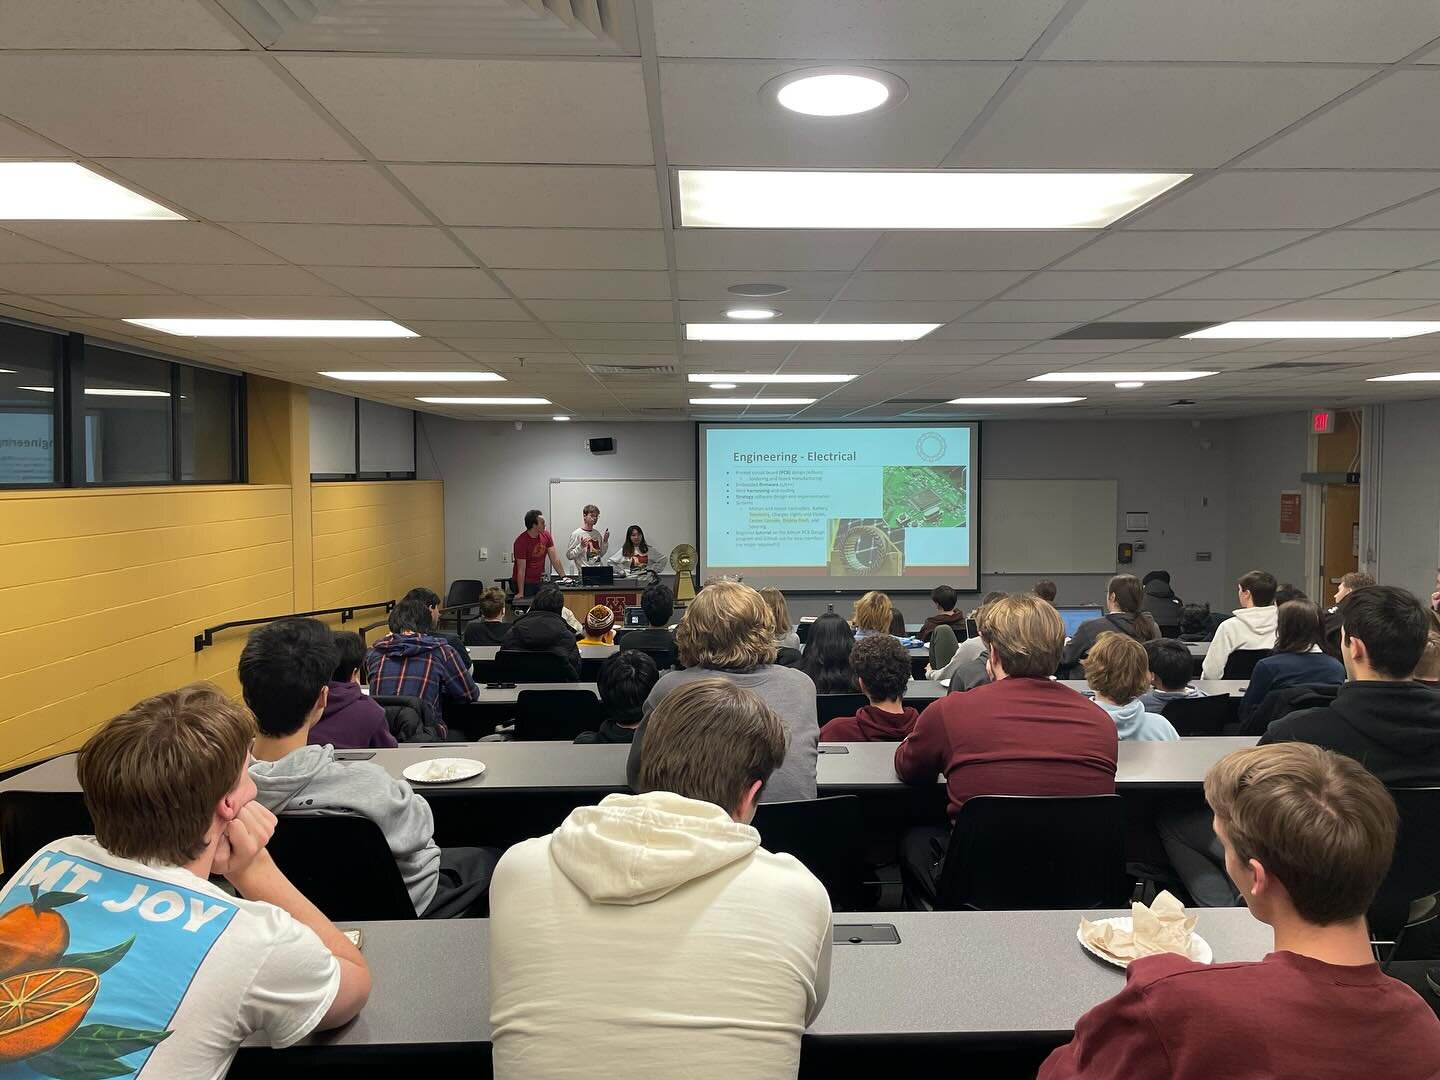 Reflecting on an eventful week at UMNSVP! 
Our recruiting sessions were a blast &ndash; talking to all of the potential new members and sharing our passion for this project. Plus, when there&rsquo;s free pizza and donuts that never hurts either! 

Ex